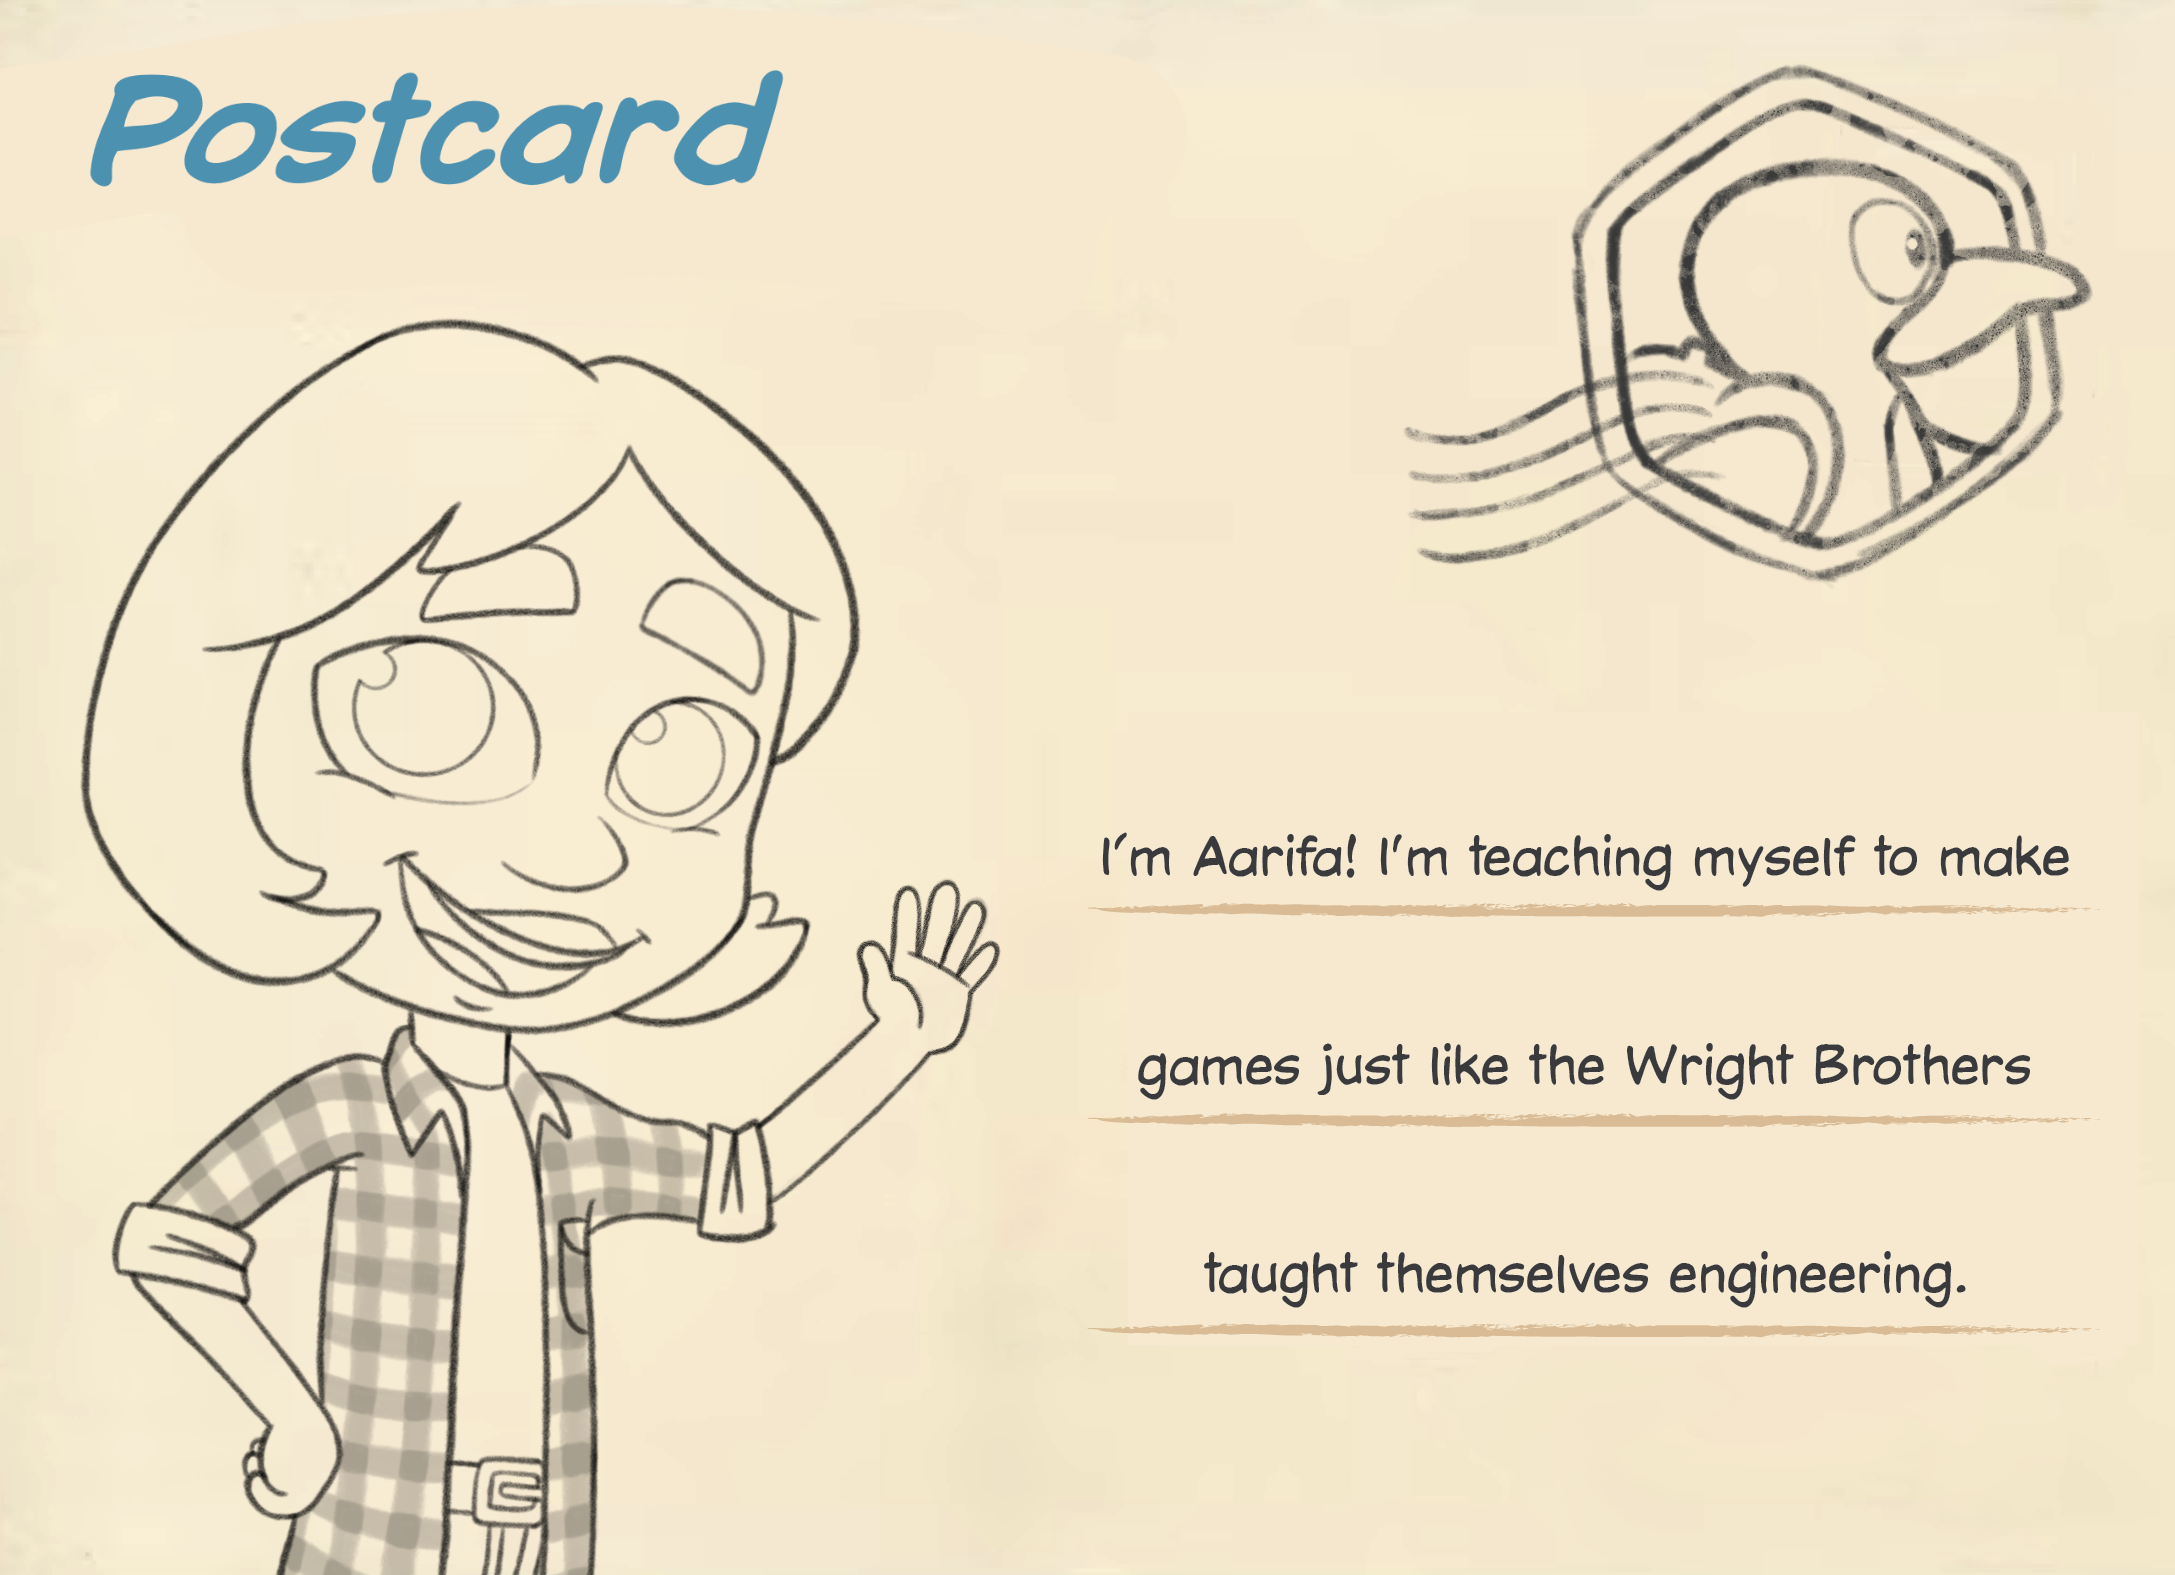 A postcard with I'm Aarifa! I'm teaching myself to make games just like the Write Brothers taught themselves engineering written on it